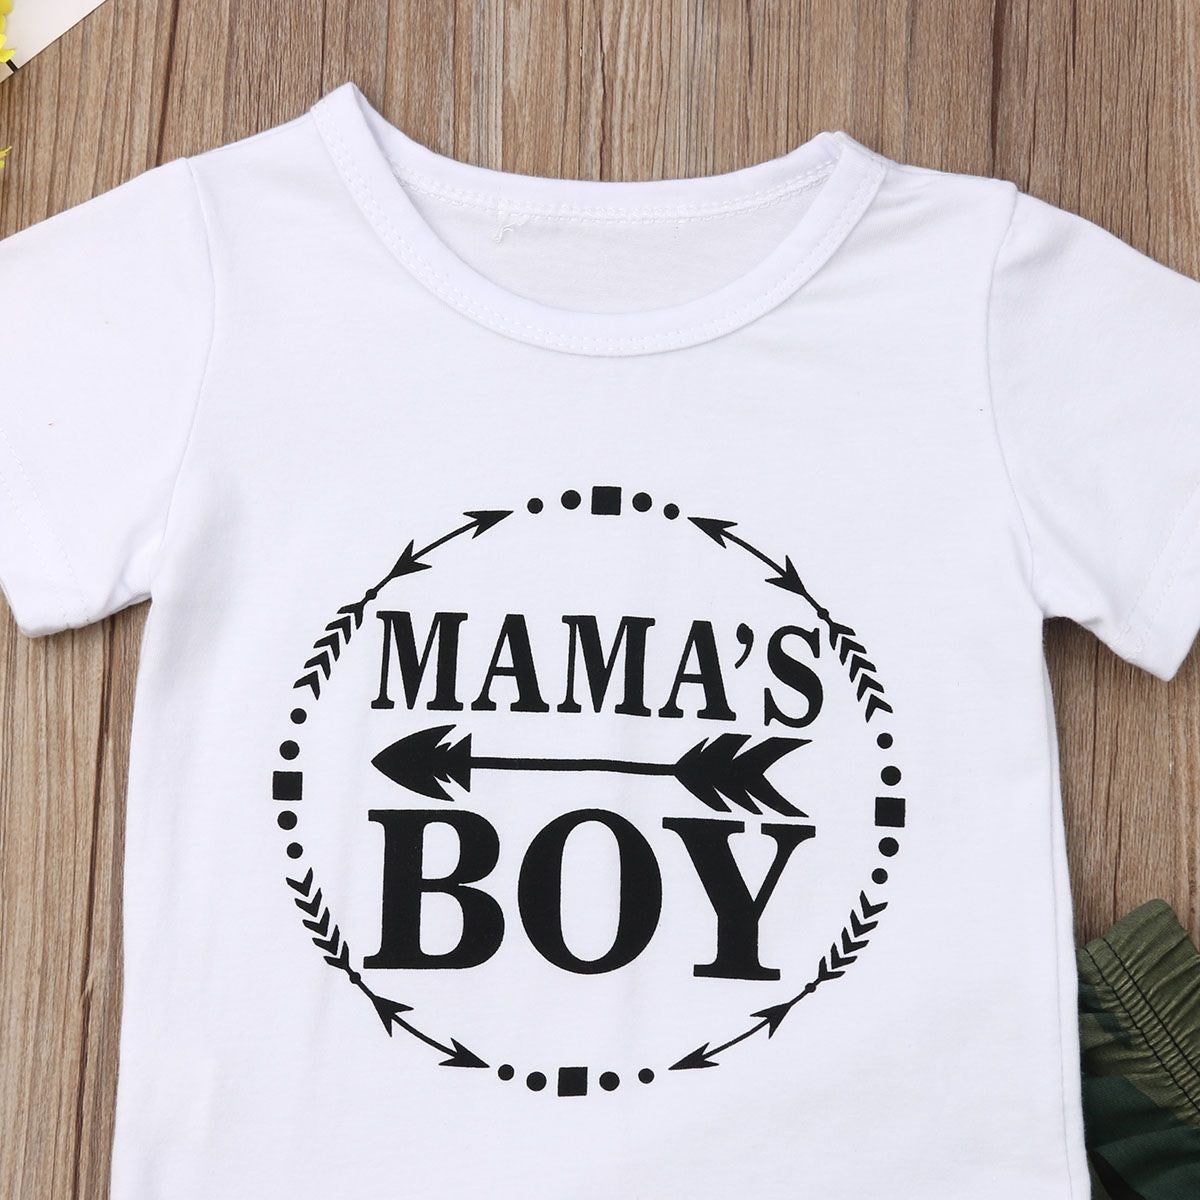 Two-Piece Pants and Shirt Set for Baby Boys, including a Graphic Tee that features 'Mama's Boy